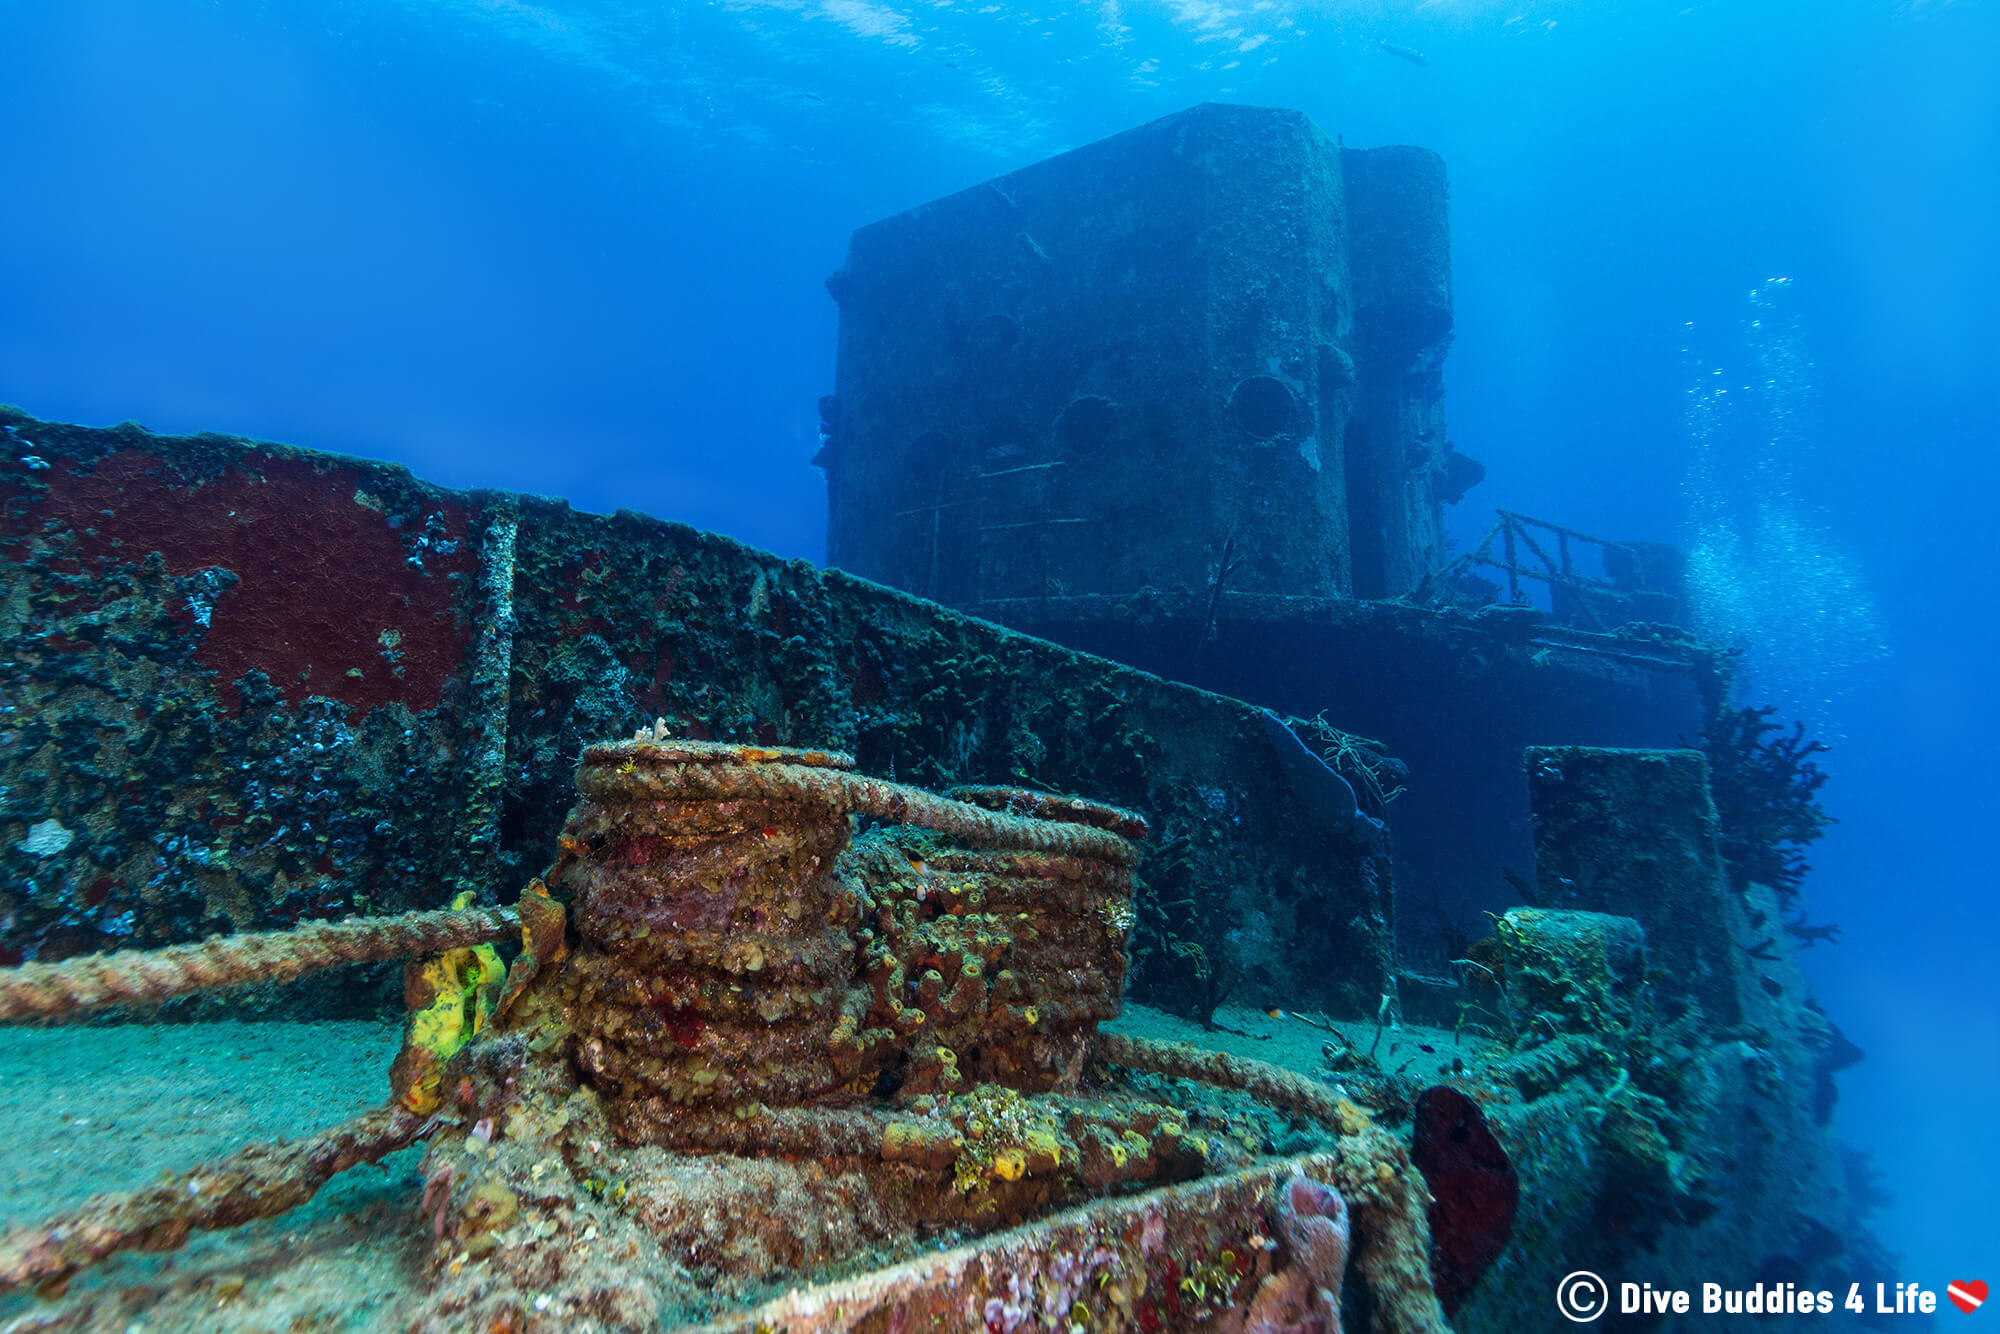 The Starboard Side Of A Cozumel Shipwreck At The Bottom Of The Caribbean In Mexico